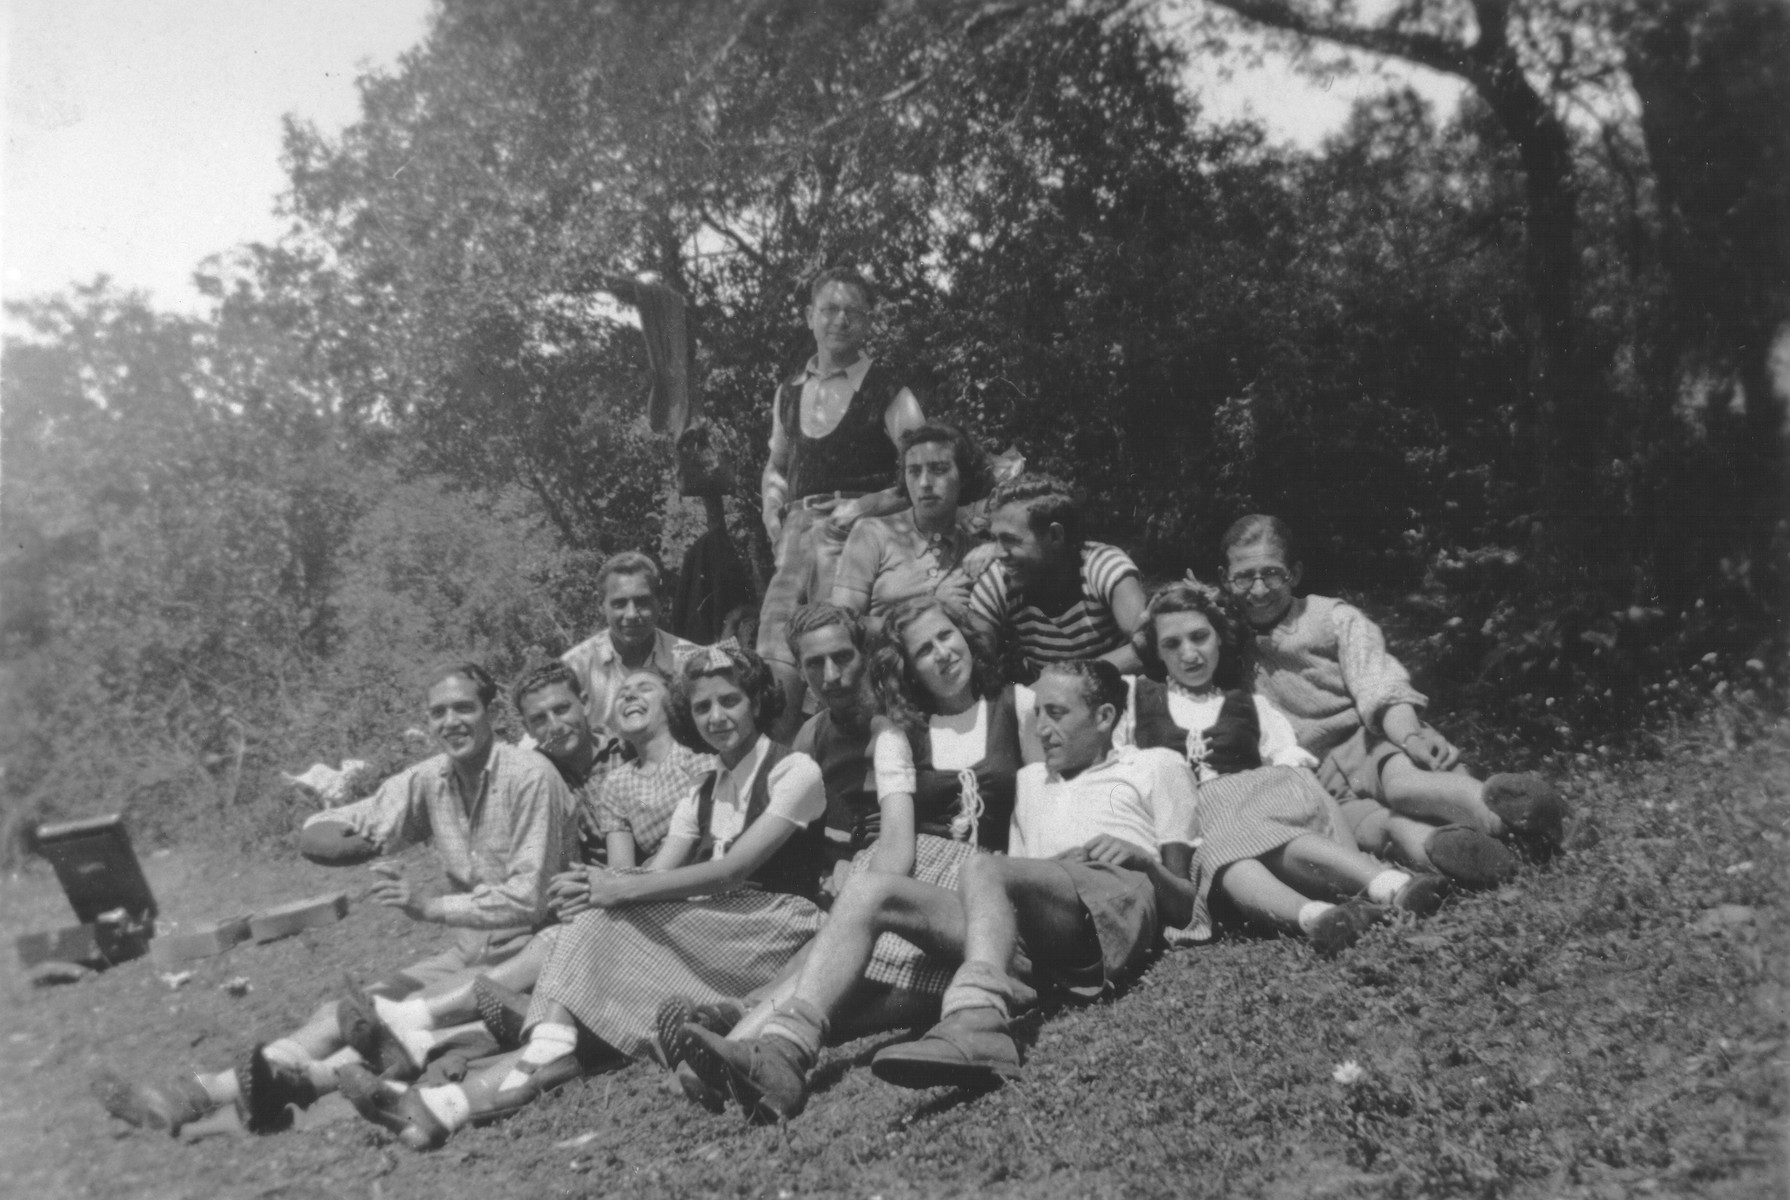 Group portrait of members of a Betar Zionist youth group on an outing.

Among those pictured is Jaco Beraha.